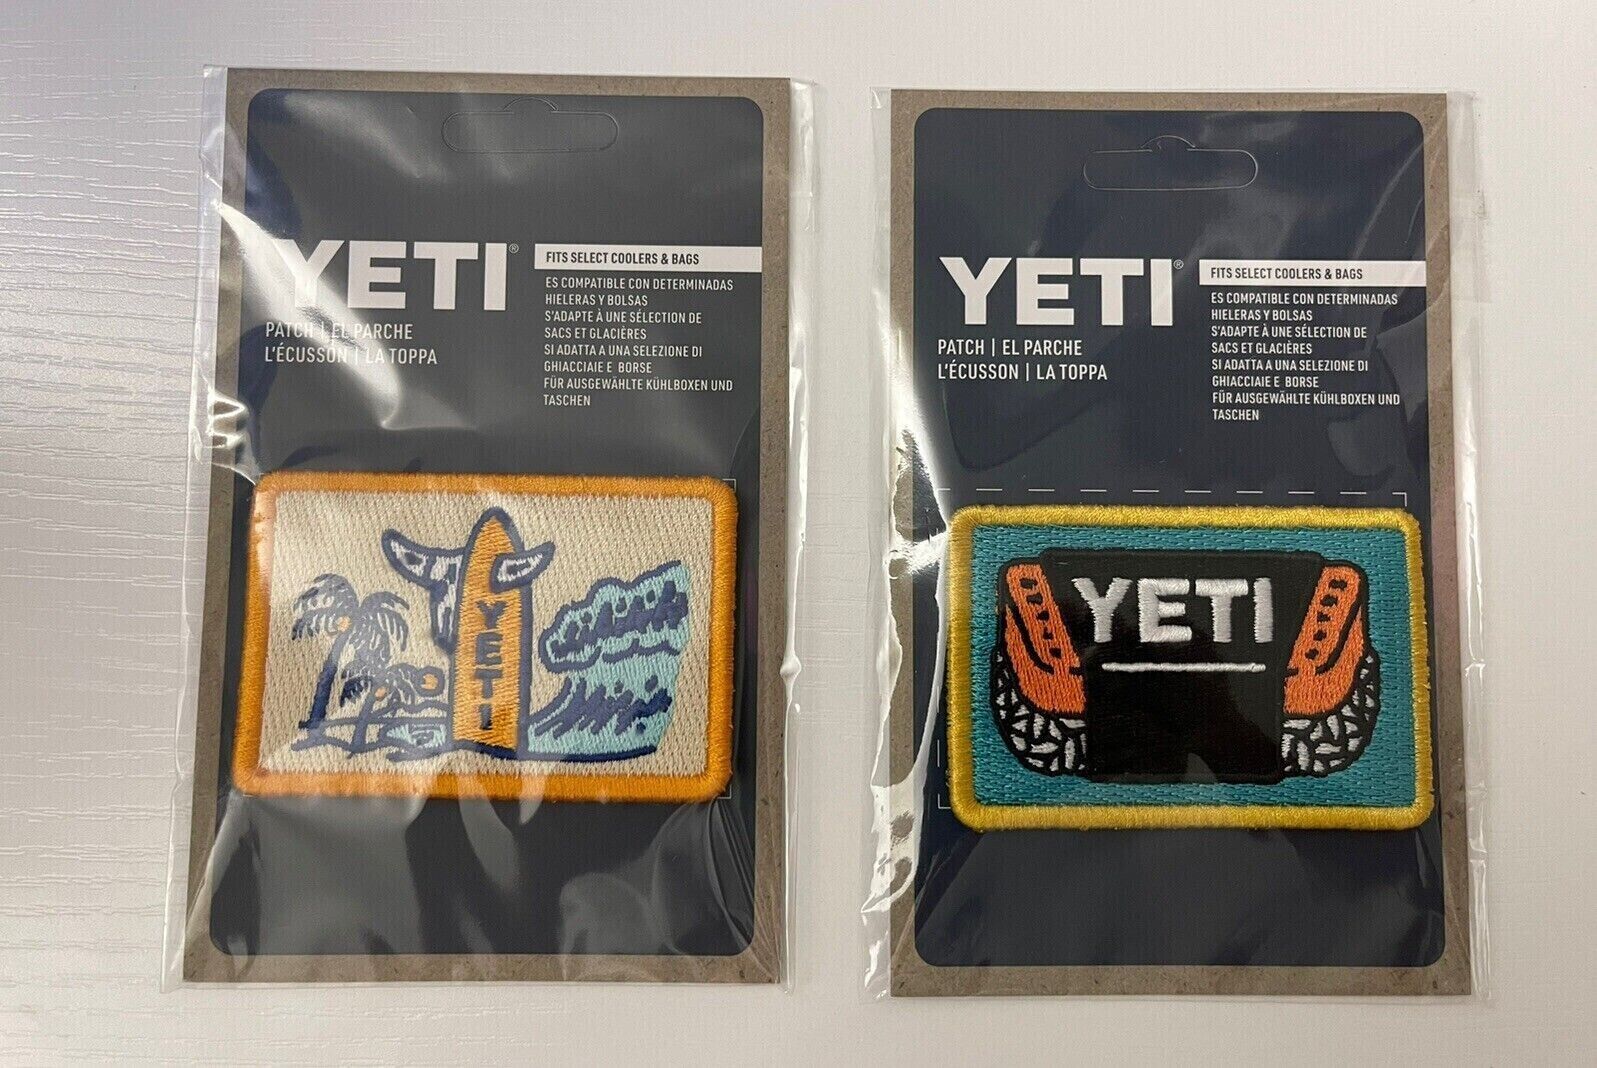 Yeti Hawaii Patches Surfboard & Spam Musubi Exclusive Only available in Hawaii